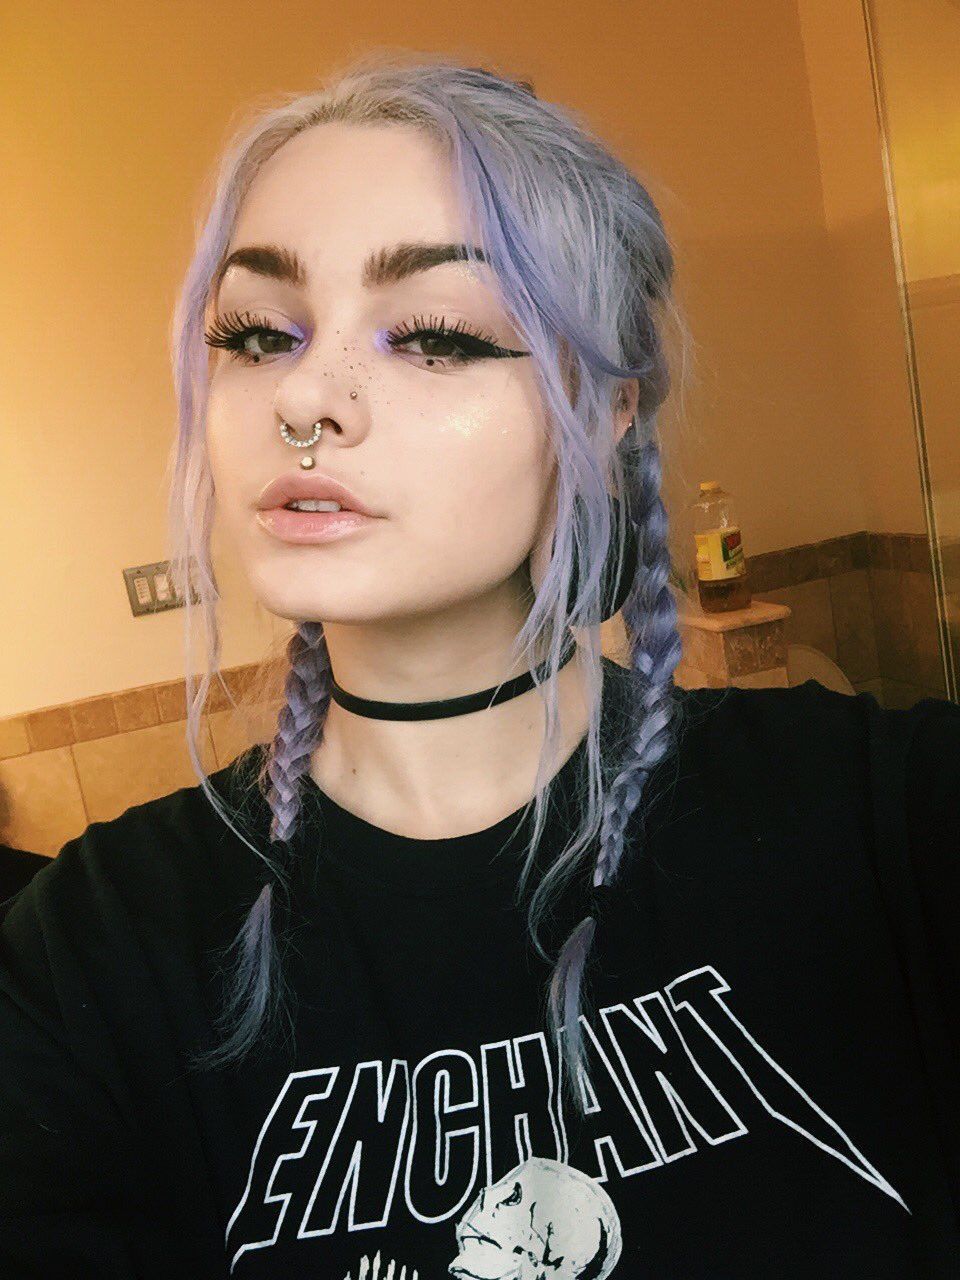 Pin By Celeste Maxwell On Hair In 2019 Edgy Makeup Grunge -   11 edgy hair 2019 ideas